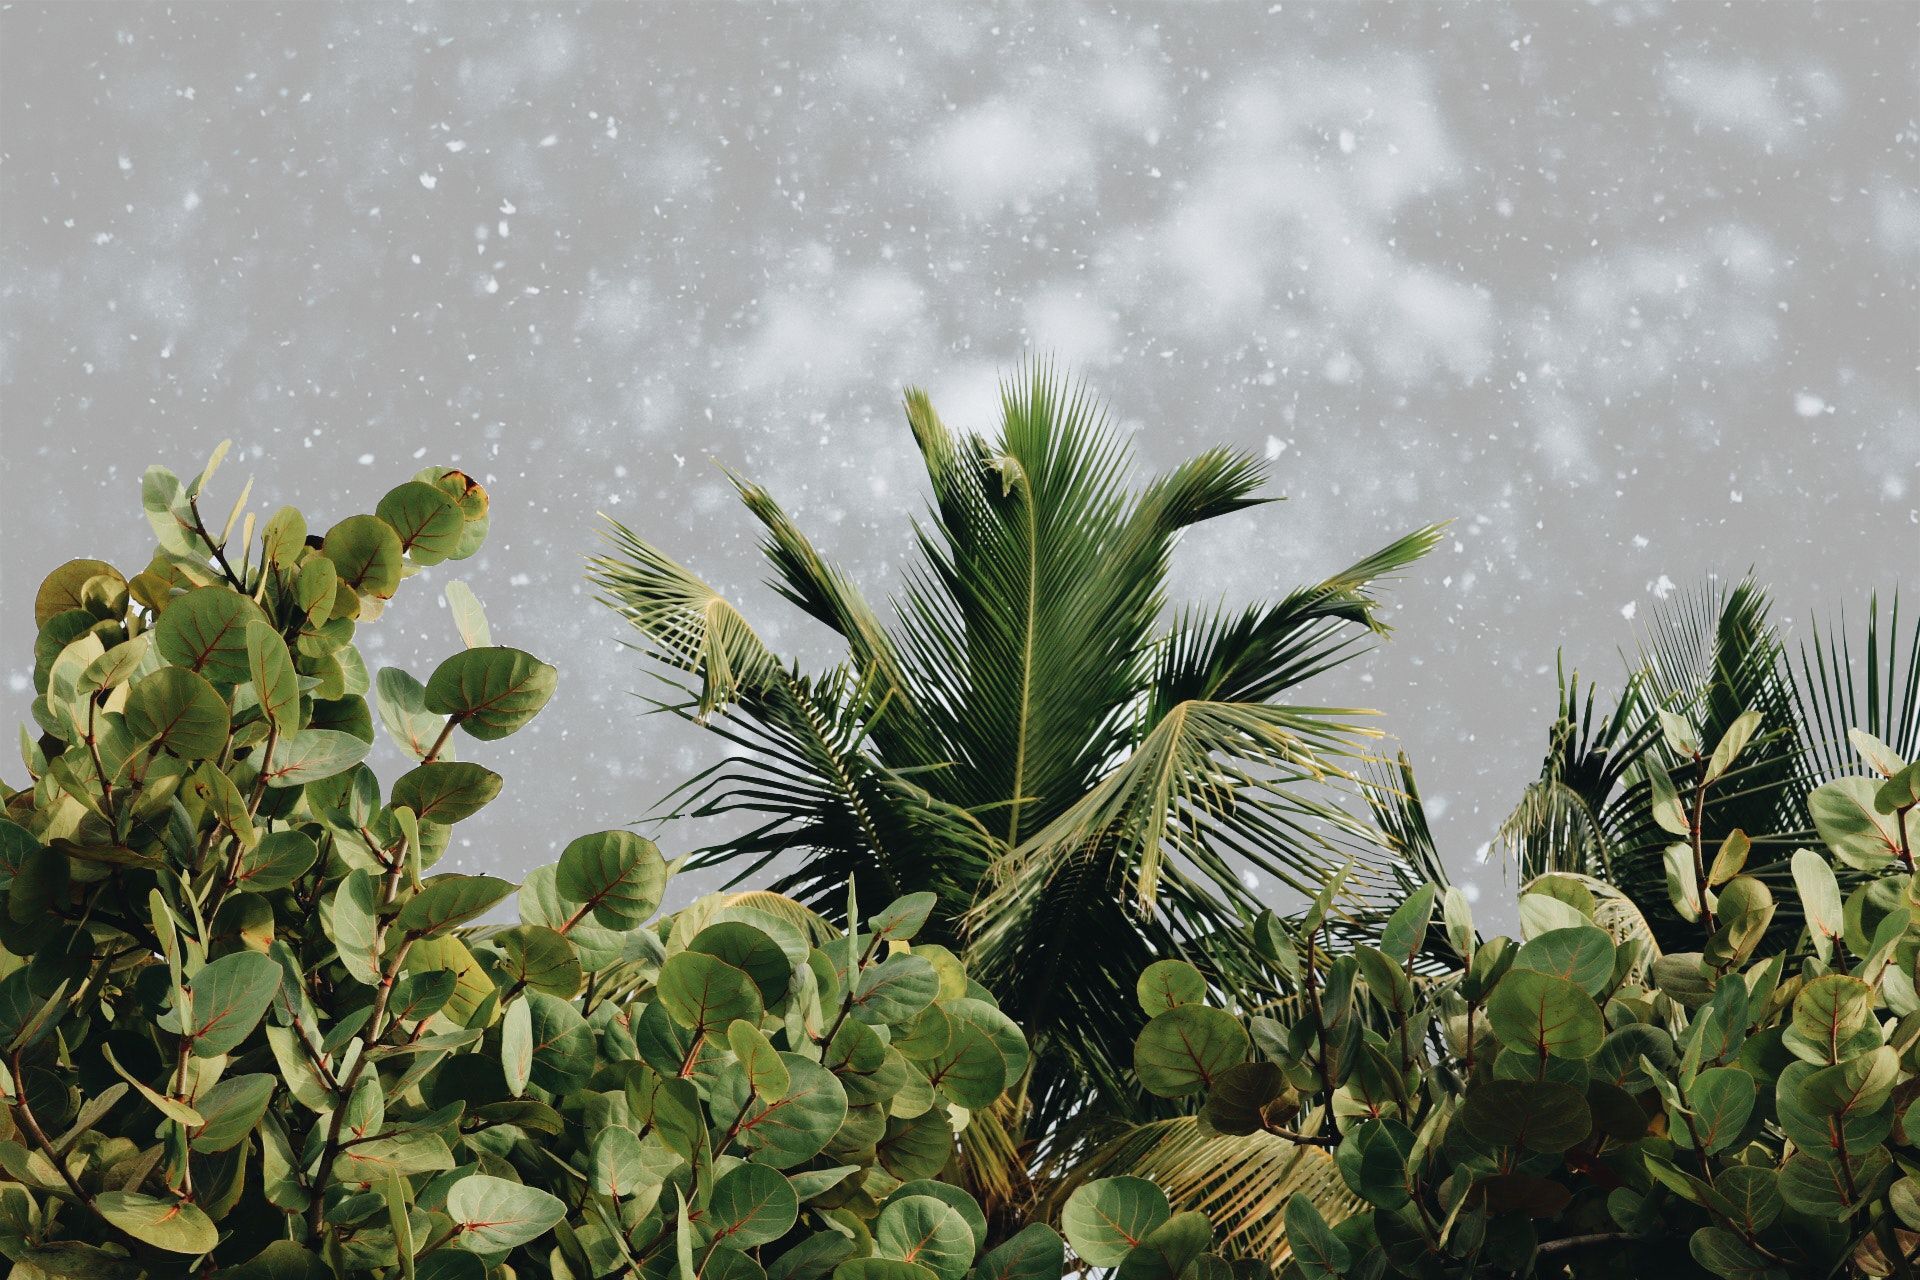 Small palm trees in the snow